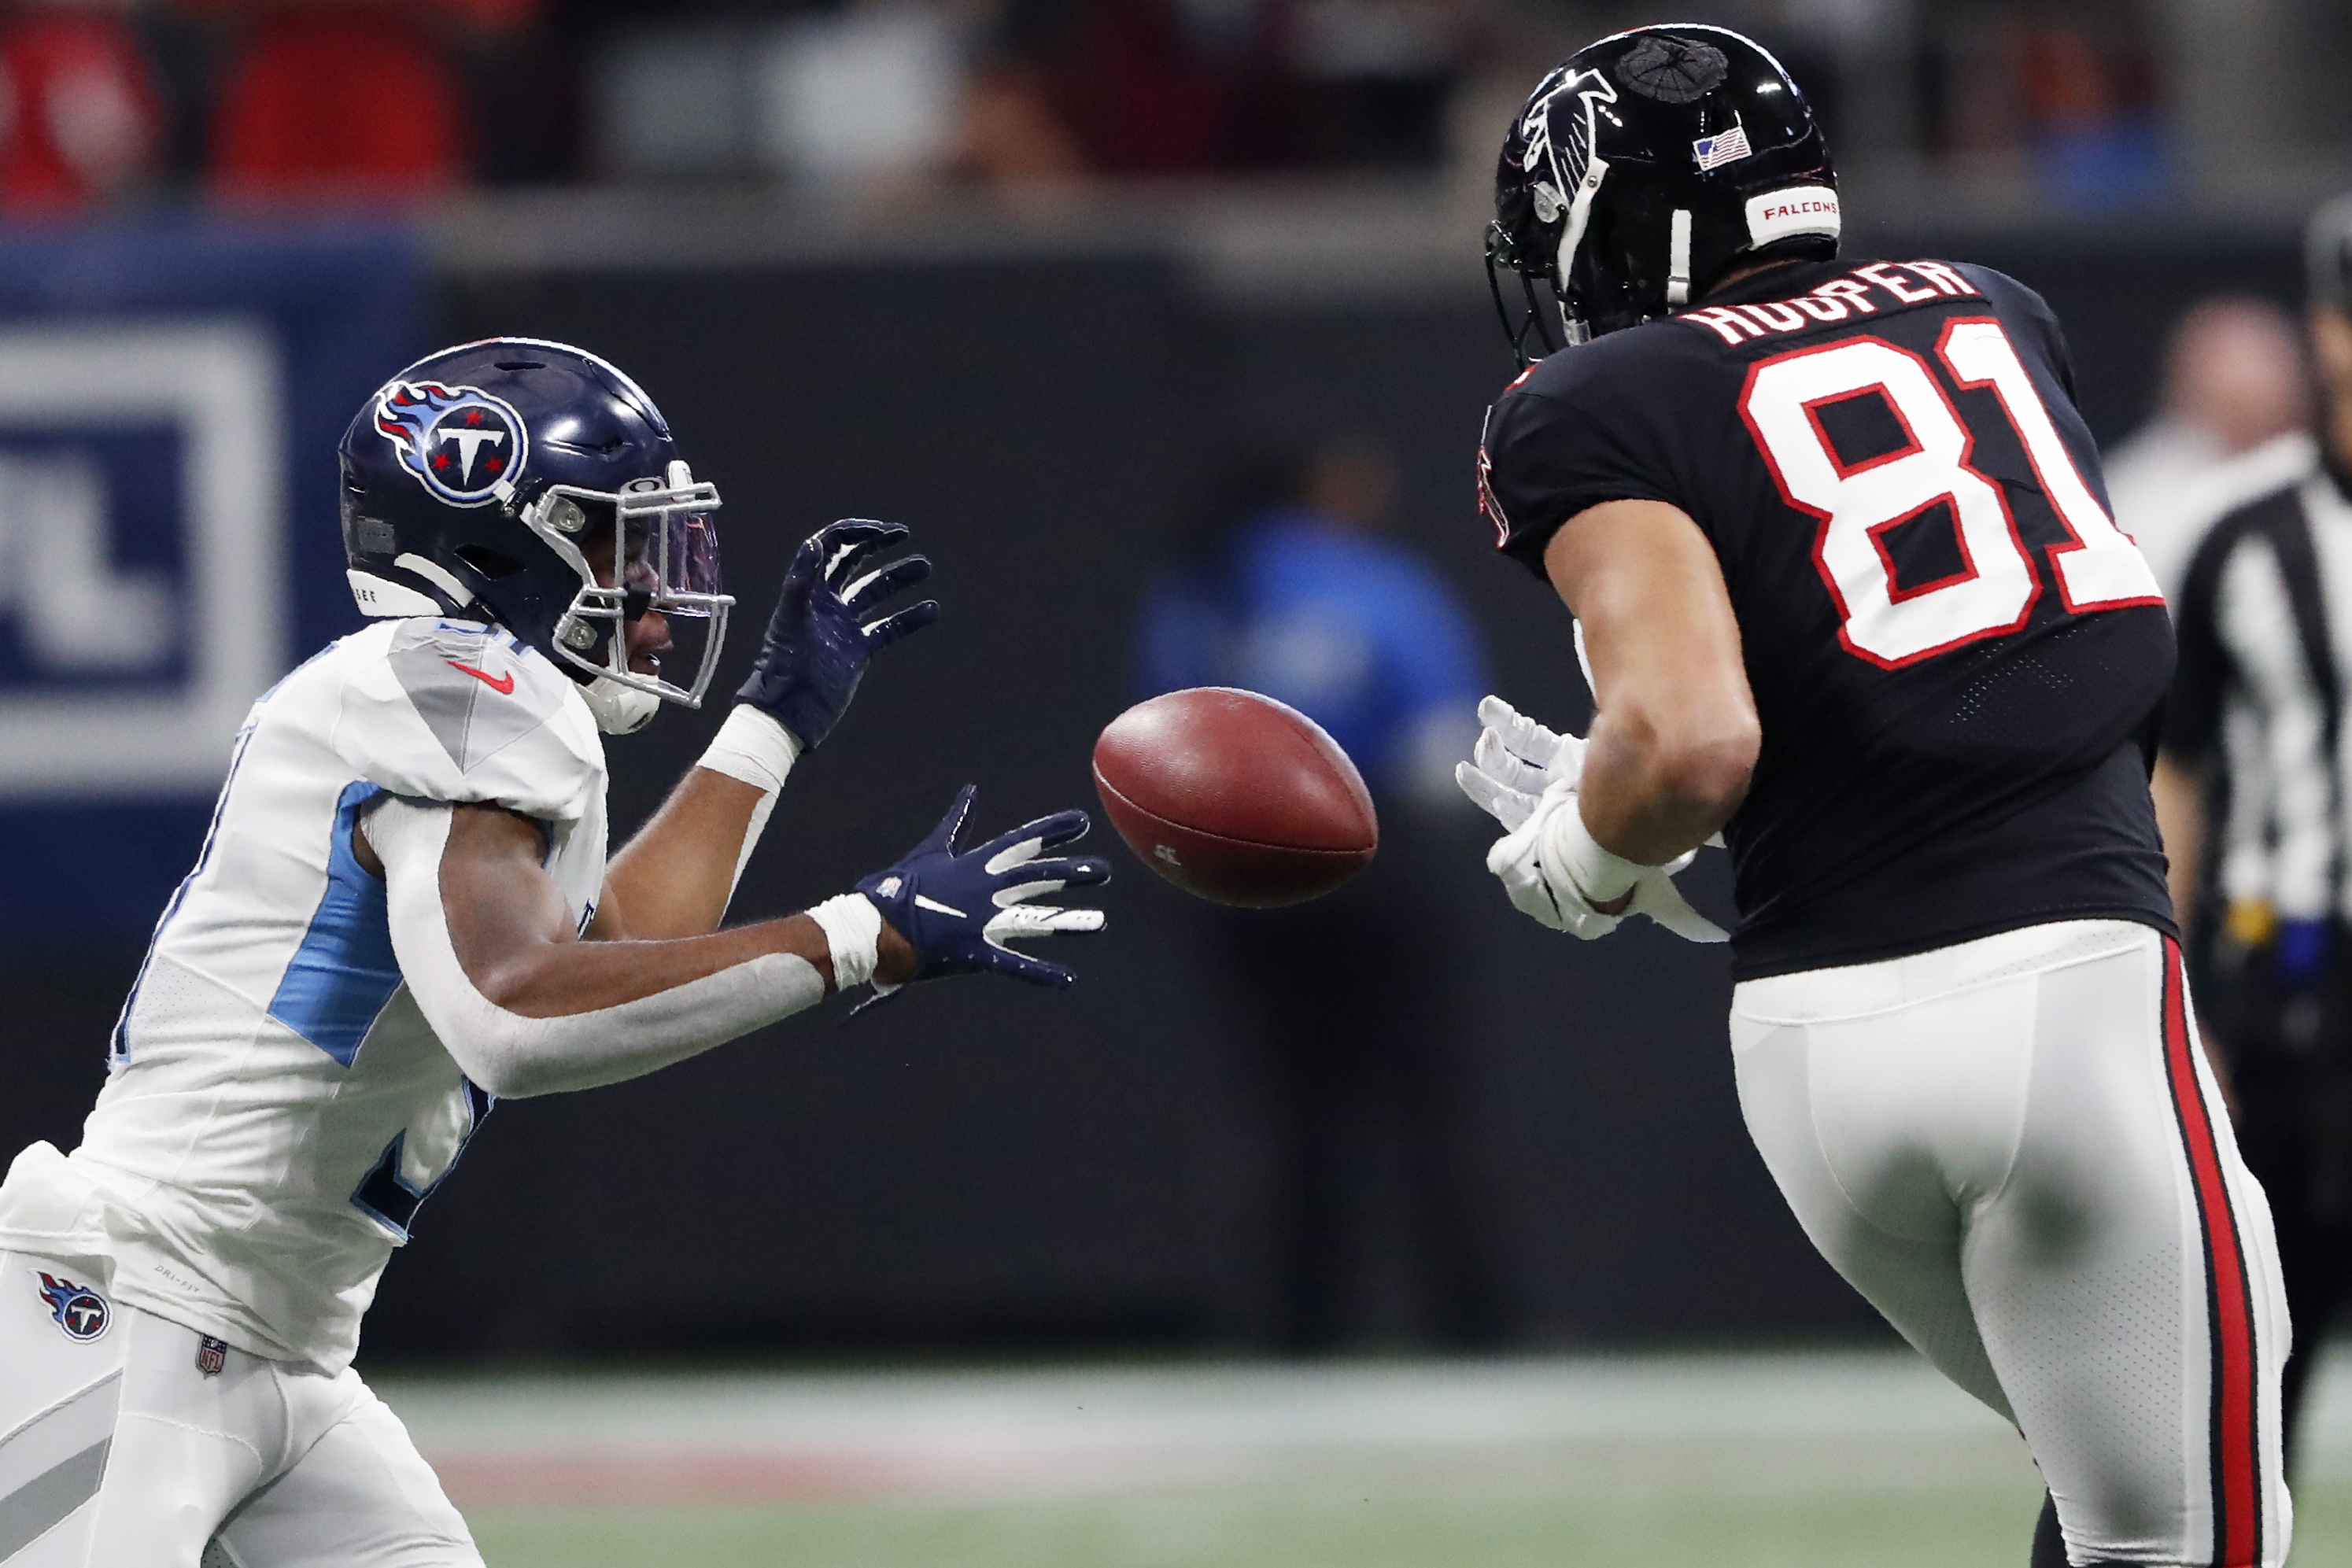 Falcons doomed by another poor start